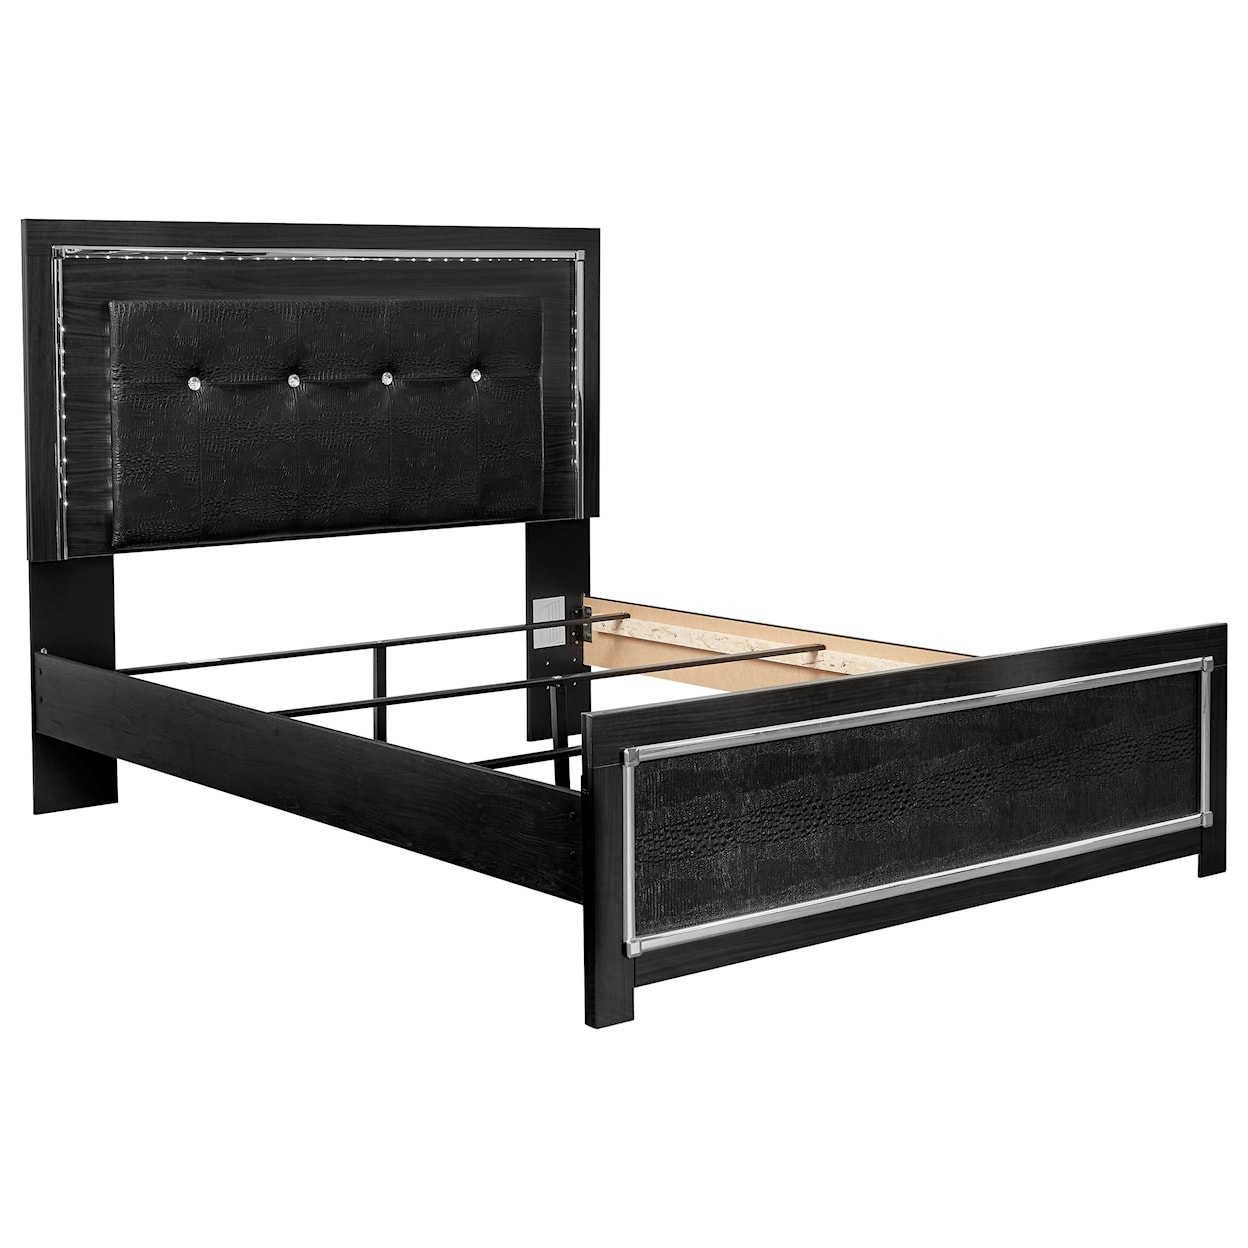 Signature Design Kaydell Queen Upholstered Bed with LED Lighting